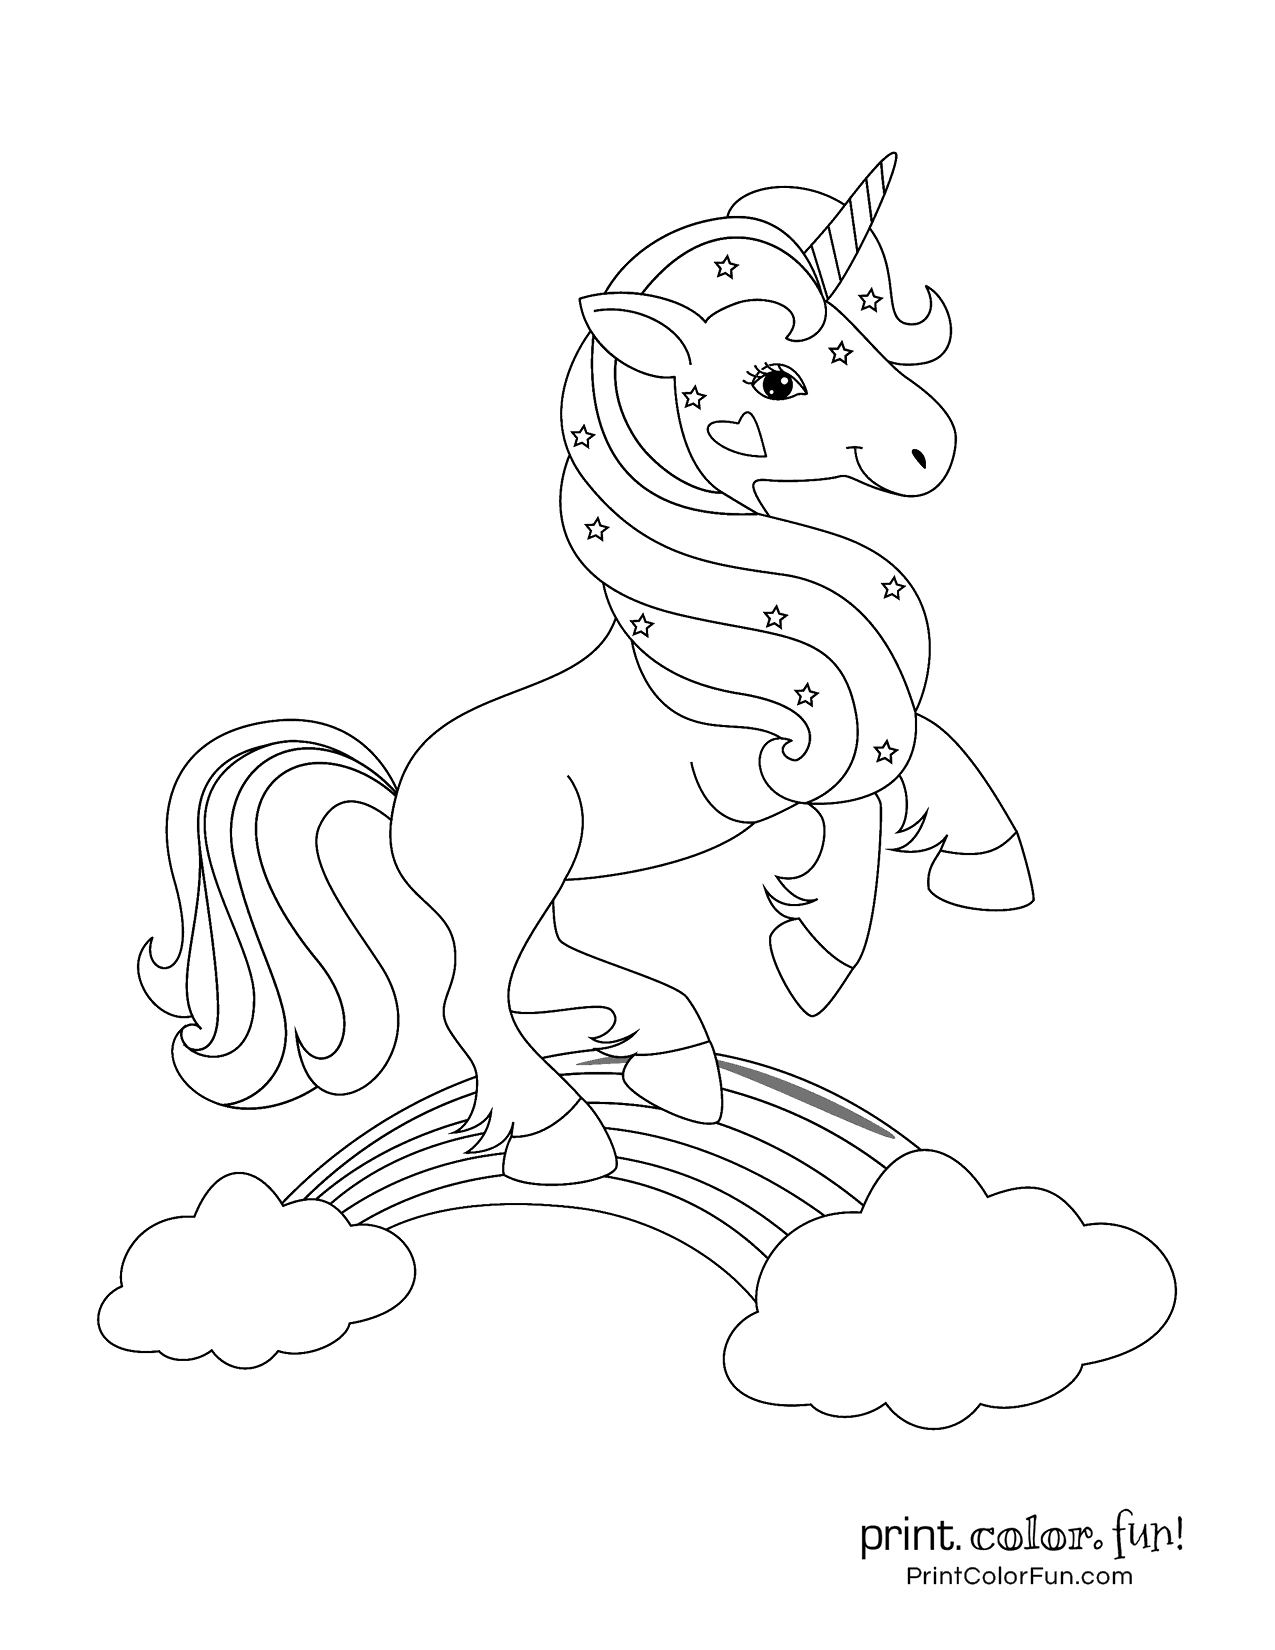 Top 100 magical unicorn coloring pages: The ultimate (free ) printable